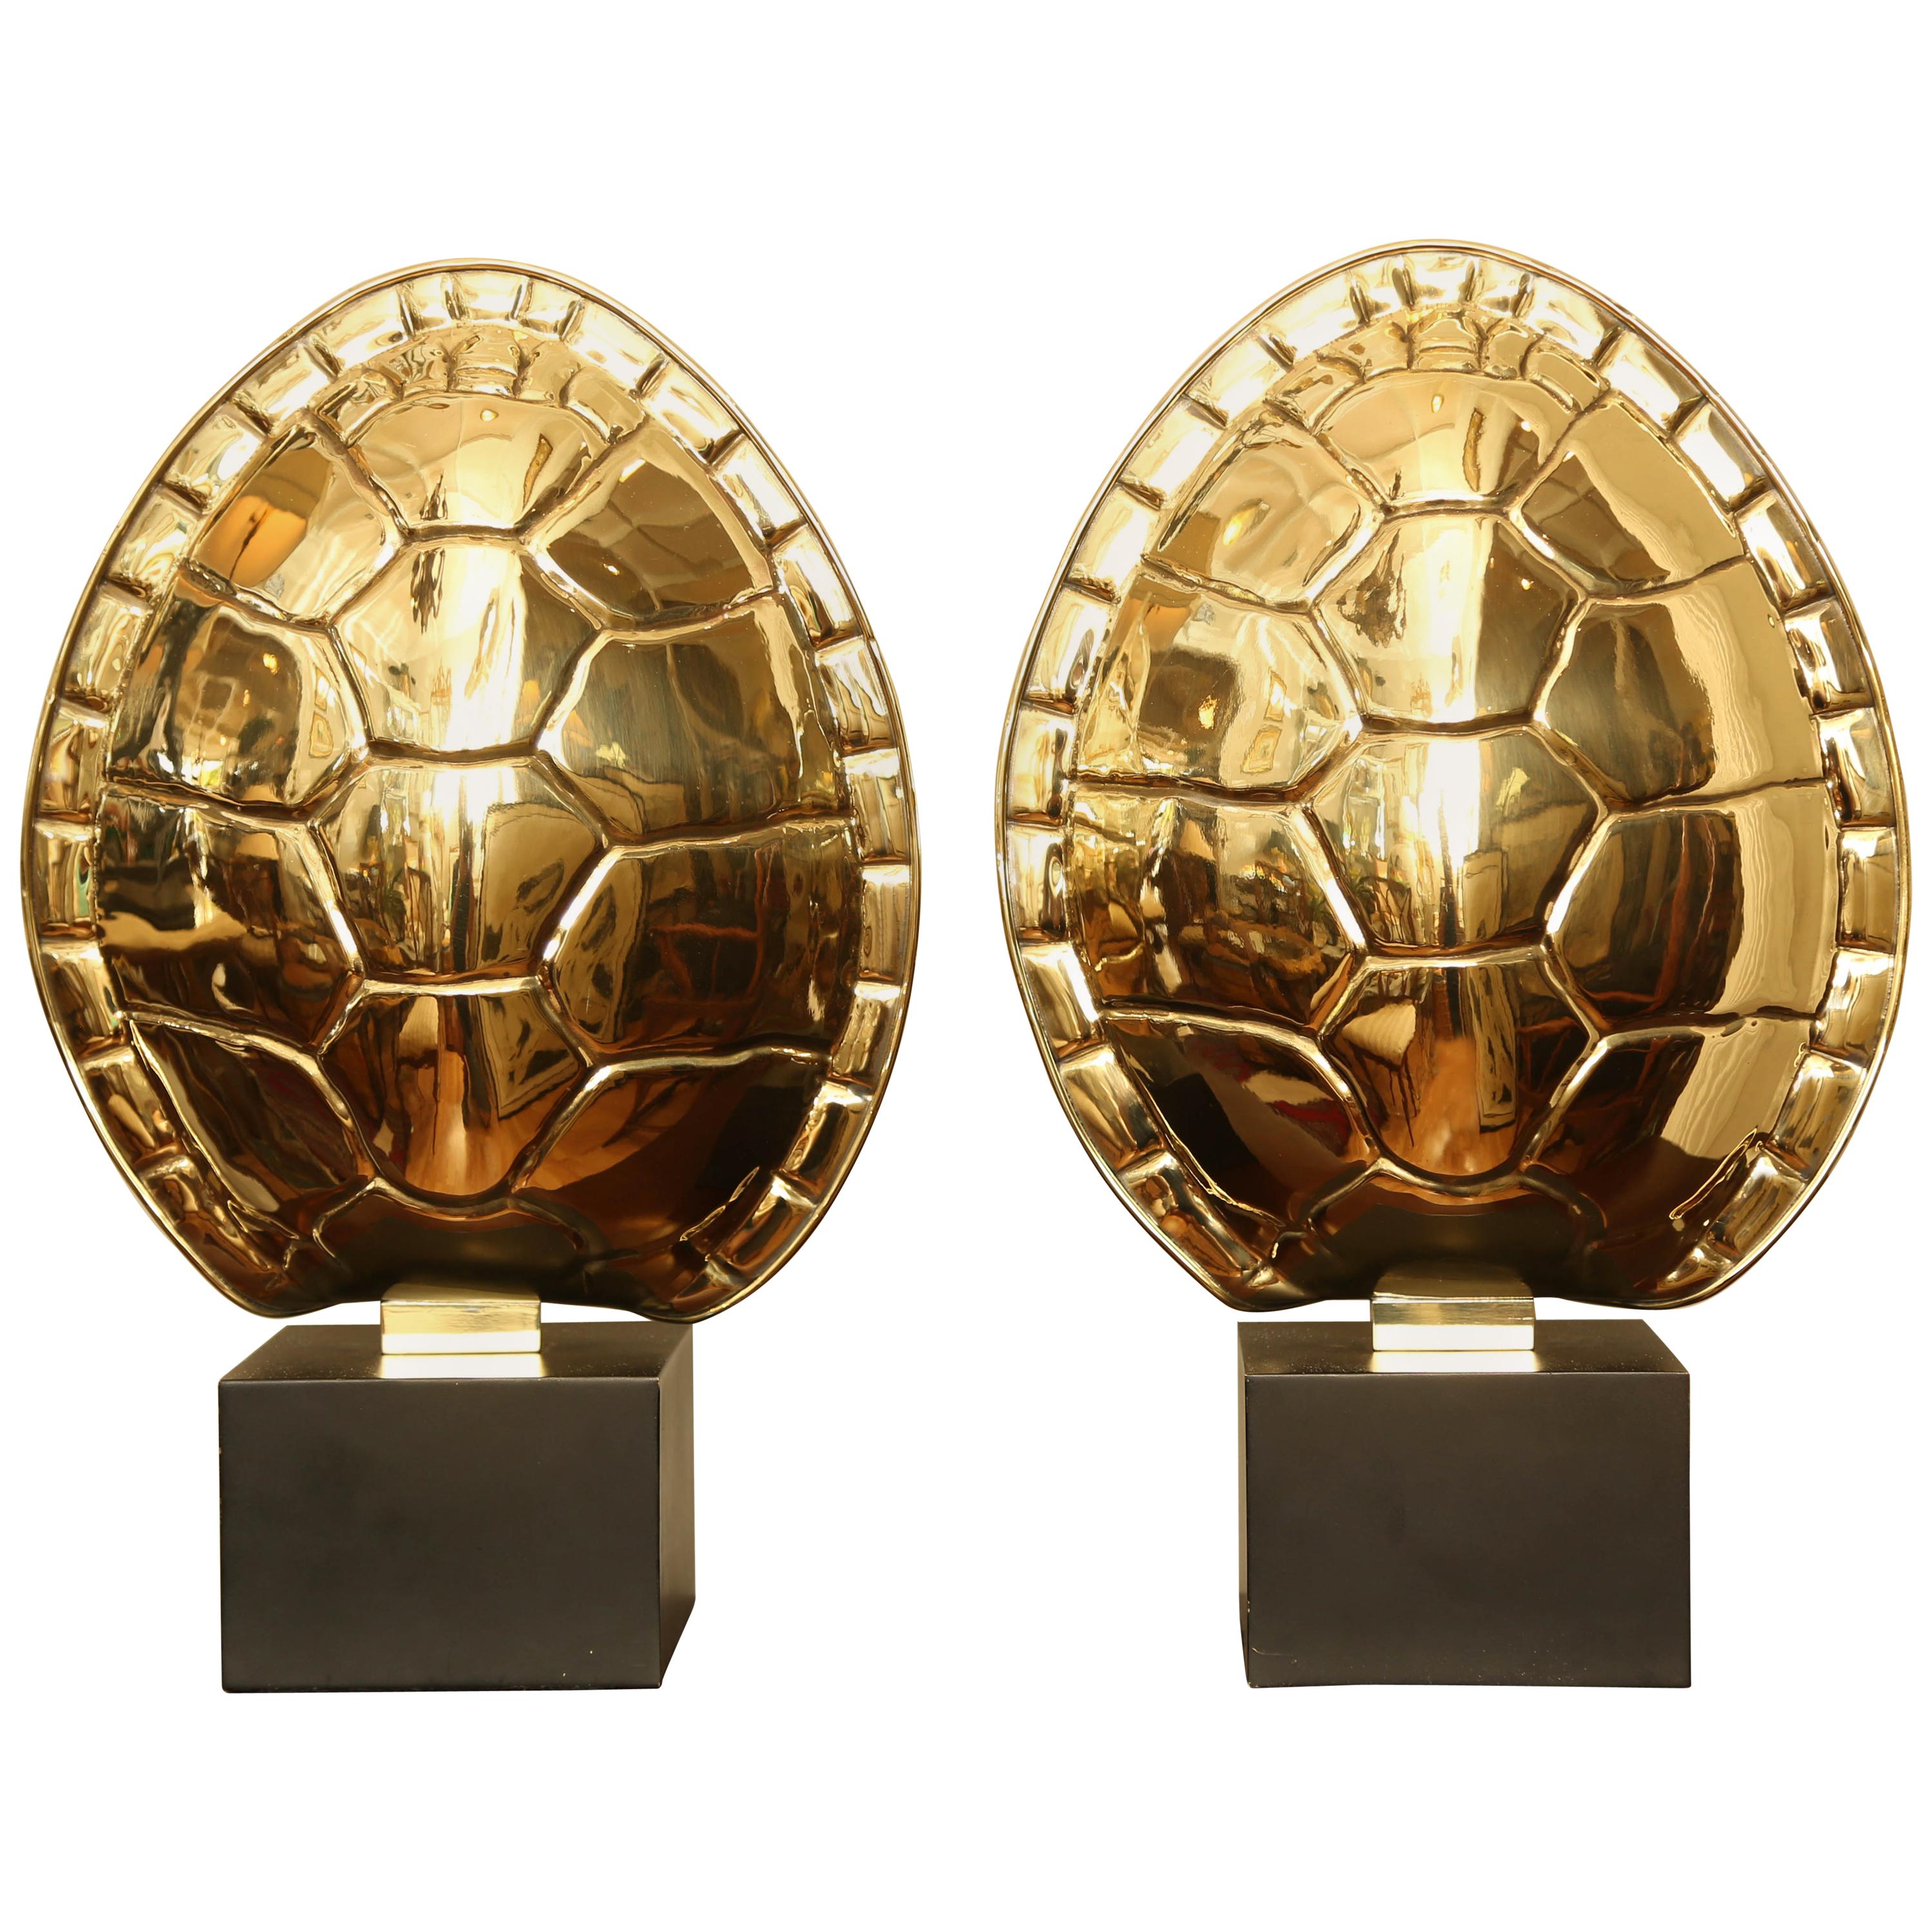 Pair of Vintage Brass Tortoise Shell Lamps by Chapman